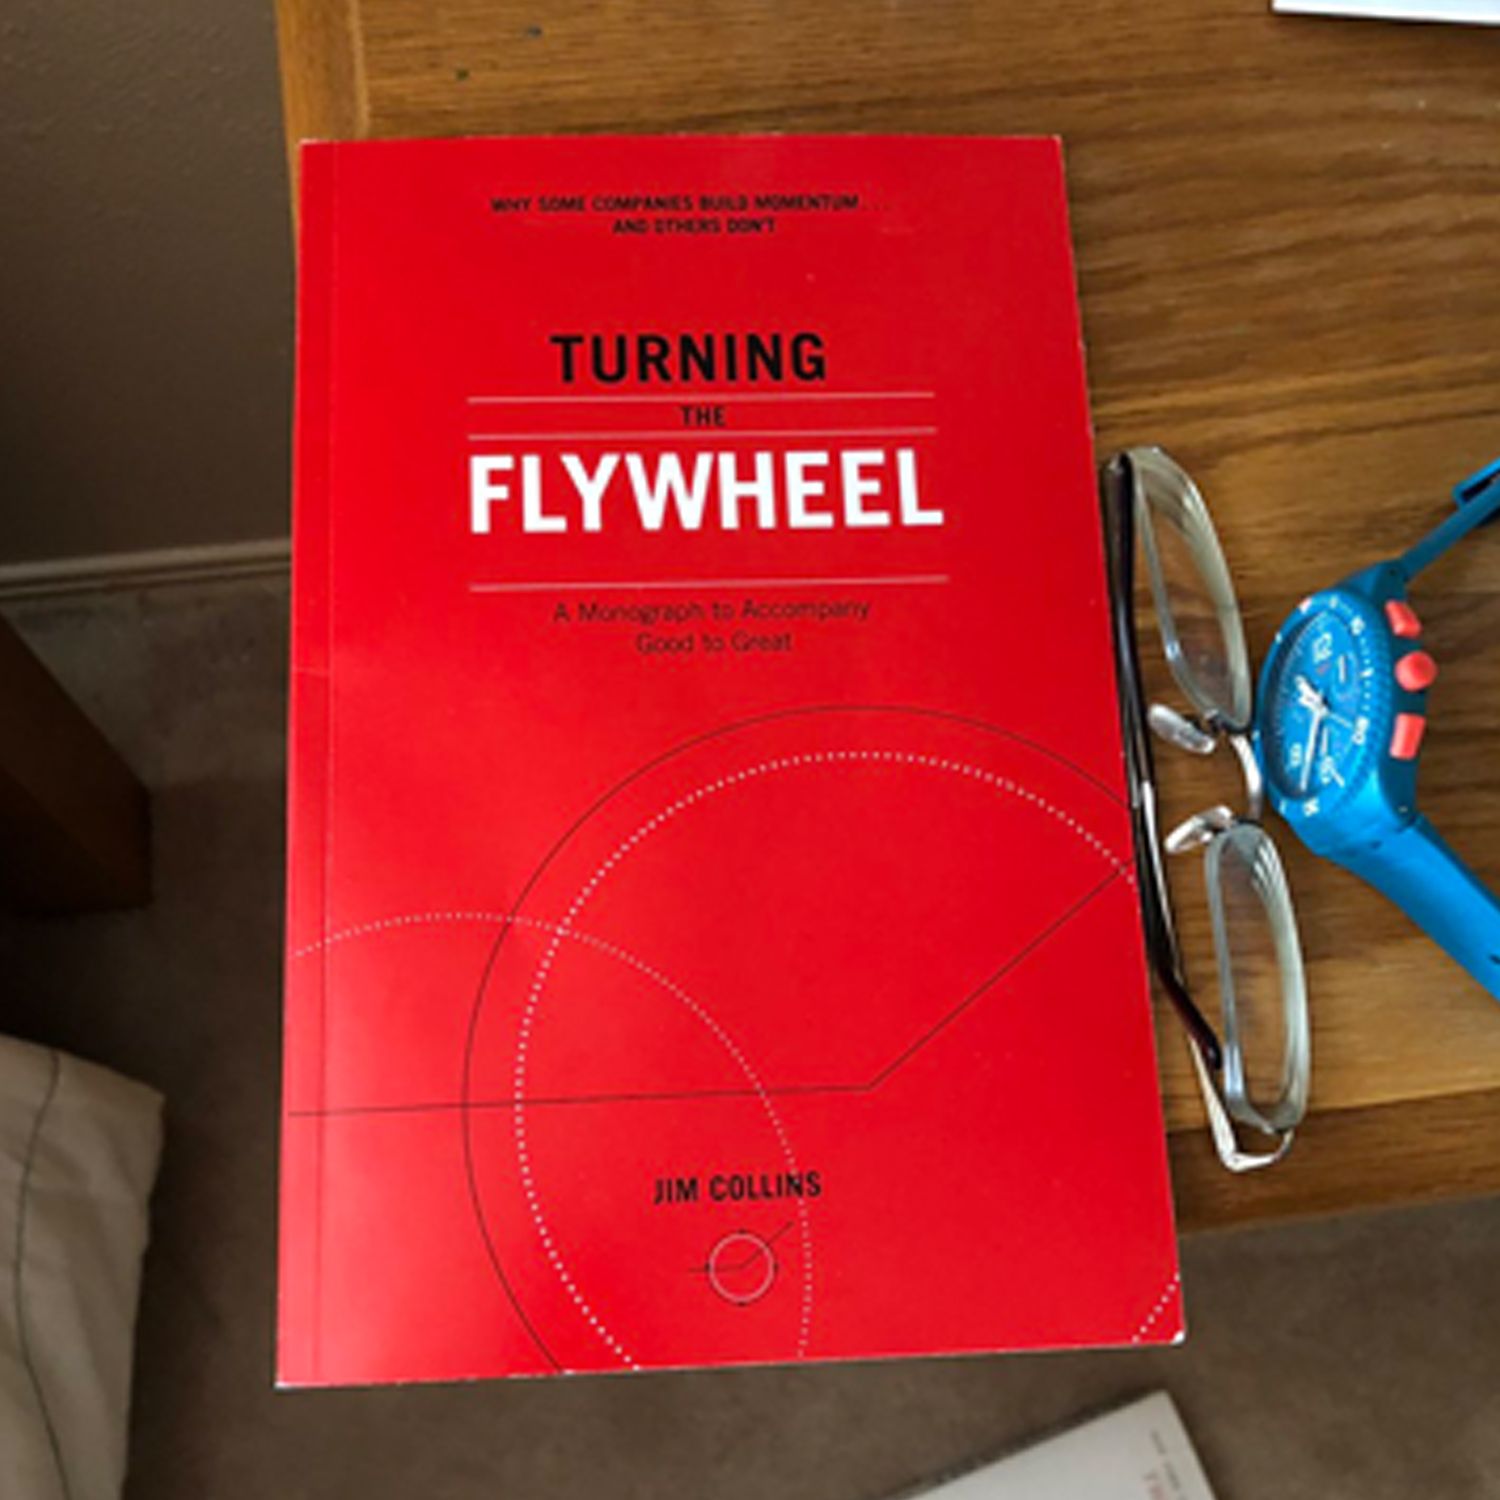  Turning the Flywheel: A Monograph to Accompany Good to Great  eBook : Collins, Jim: Kindle Store